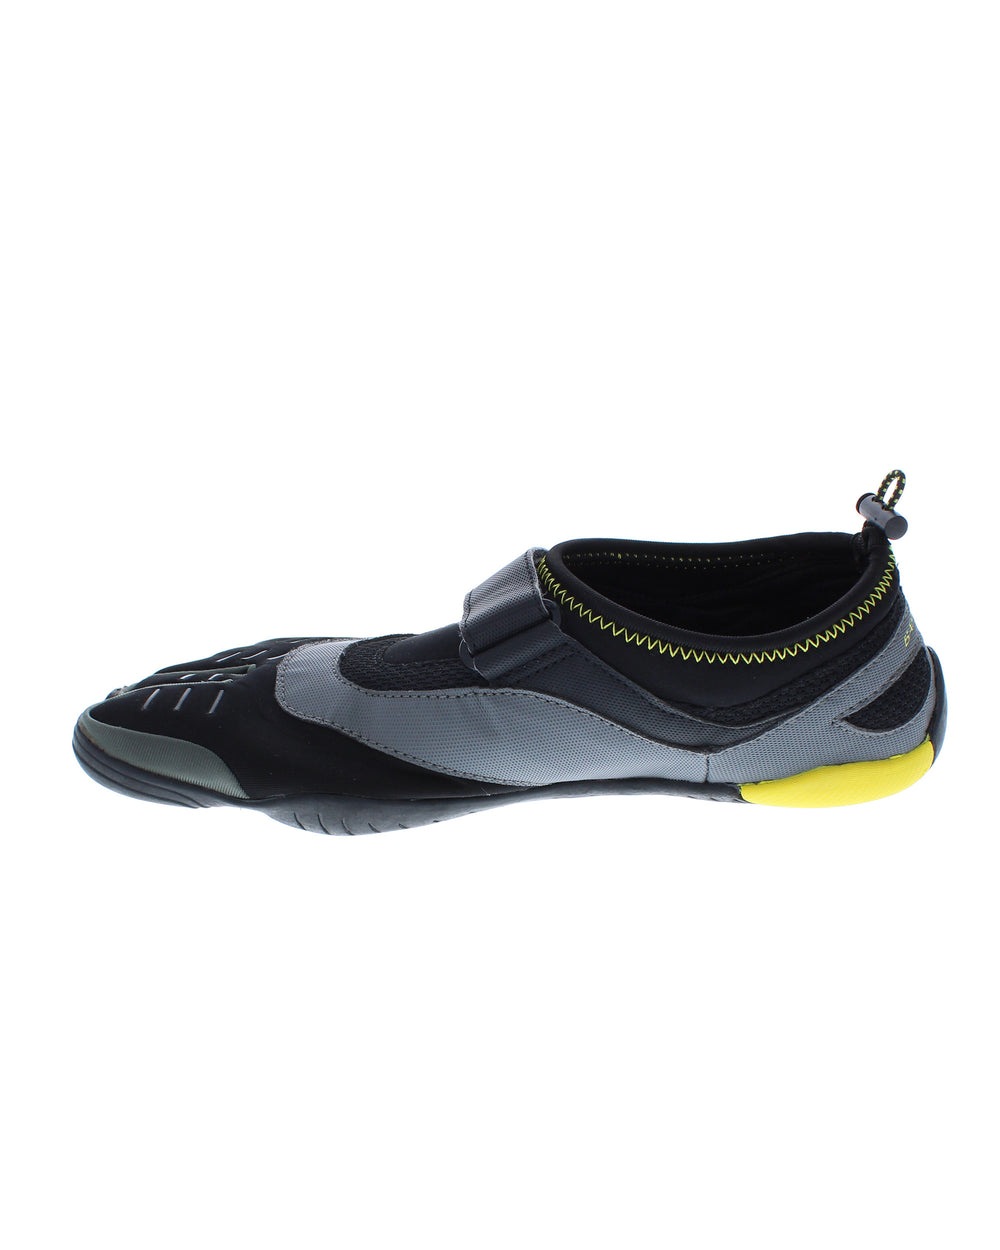 Men's 3T Barefoot Max Water Shoes - Black/Yellow